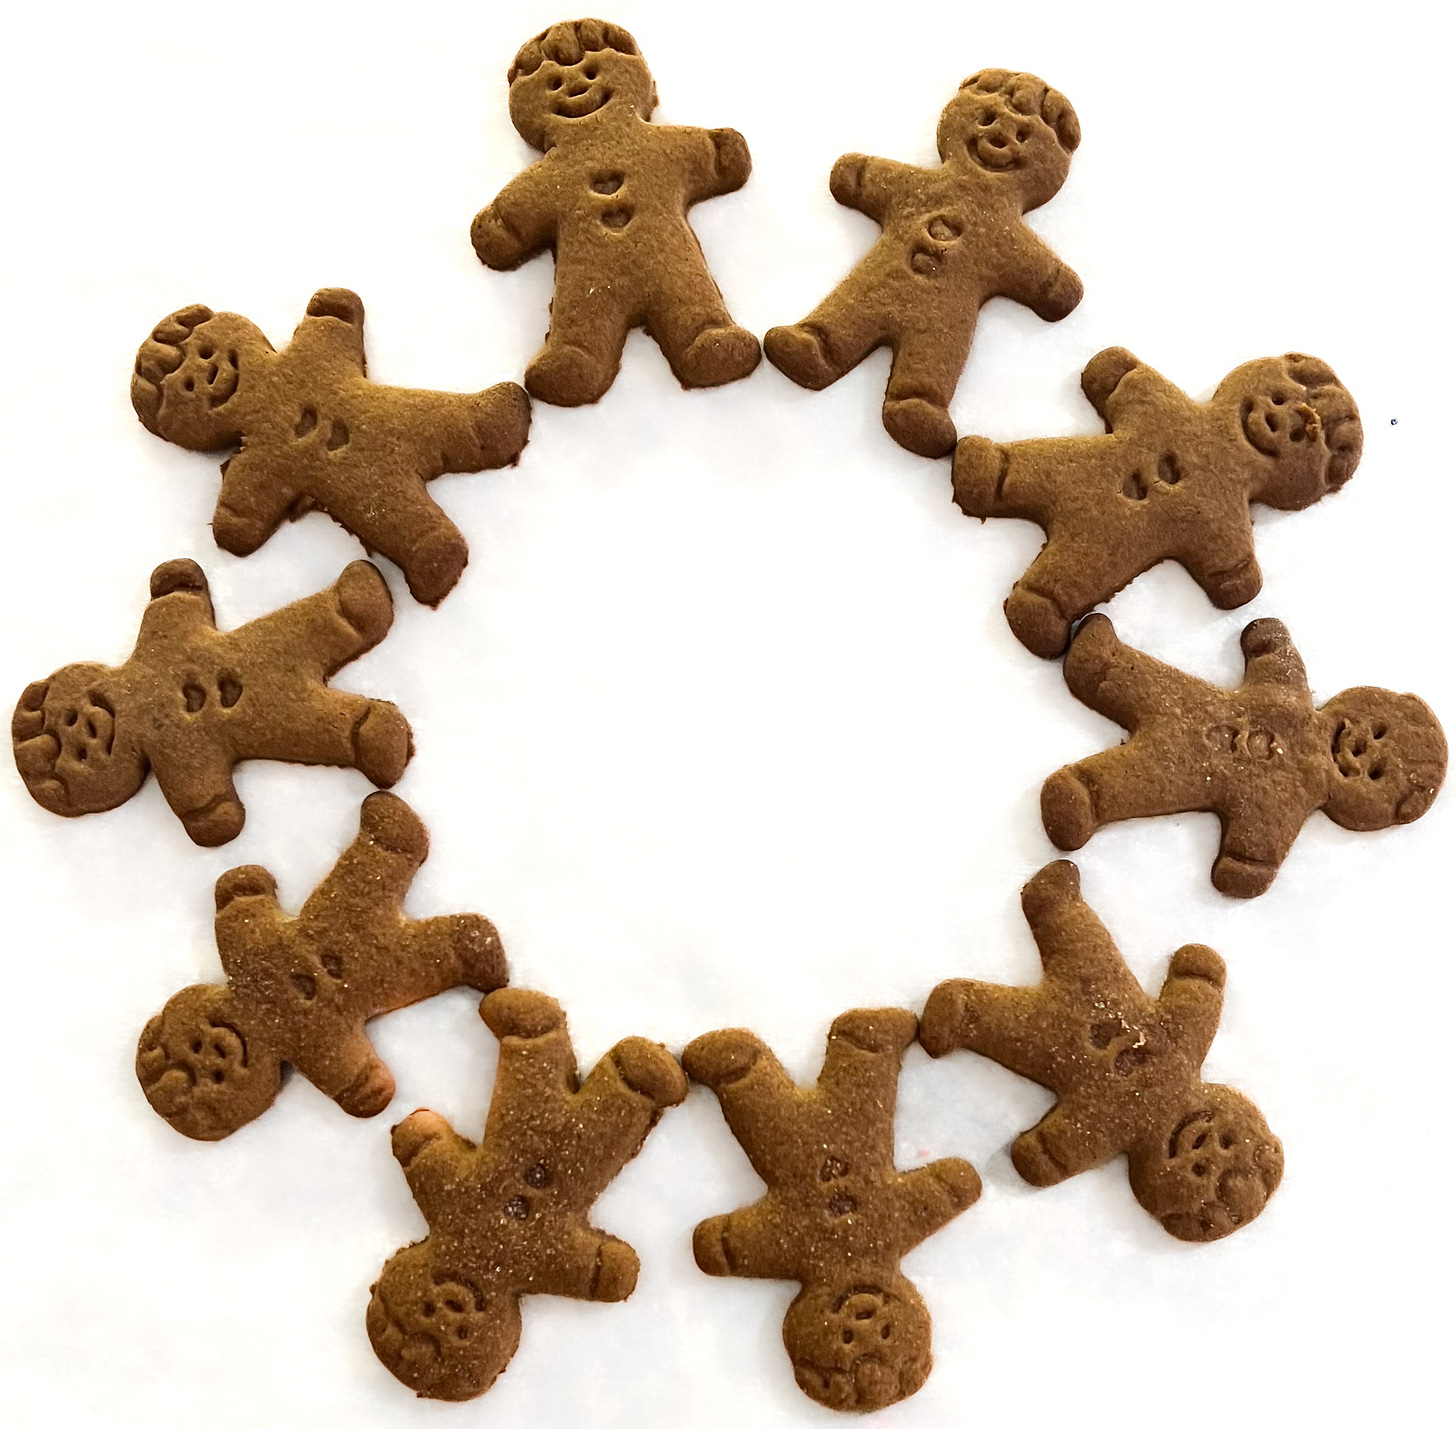 Small gingerbread man cookies layed out in a circle against a white background